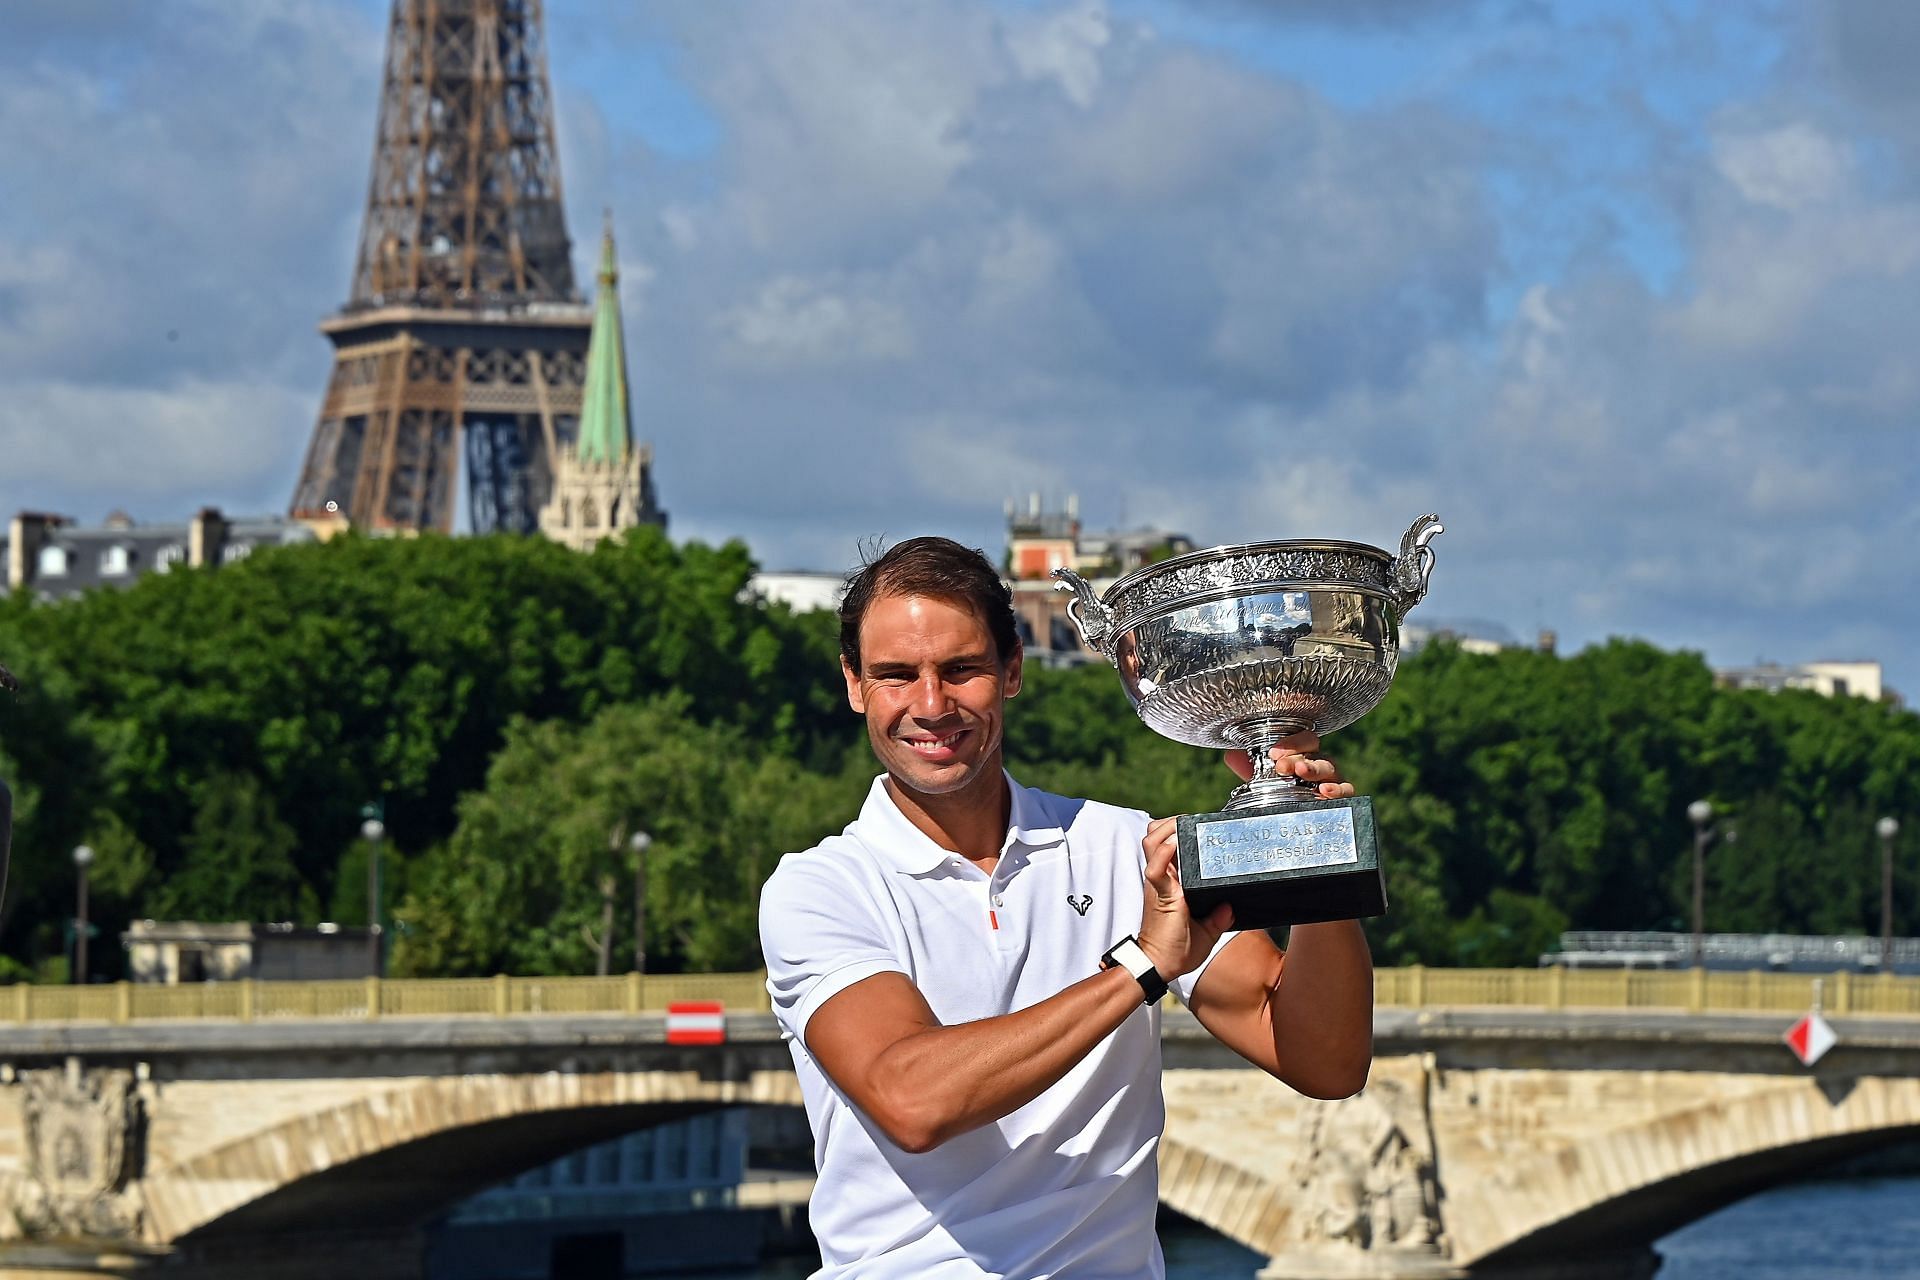 Rafael Nadal won his 22nd Grand Slam title at the French Open